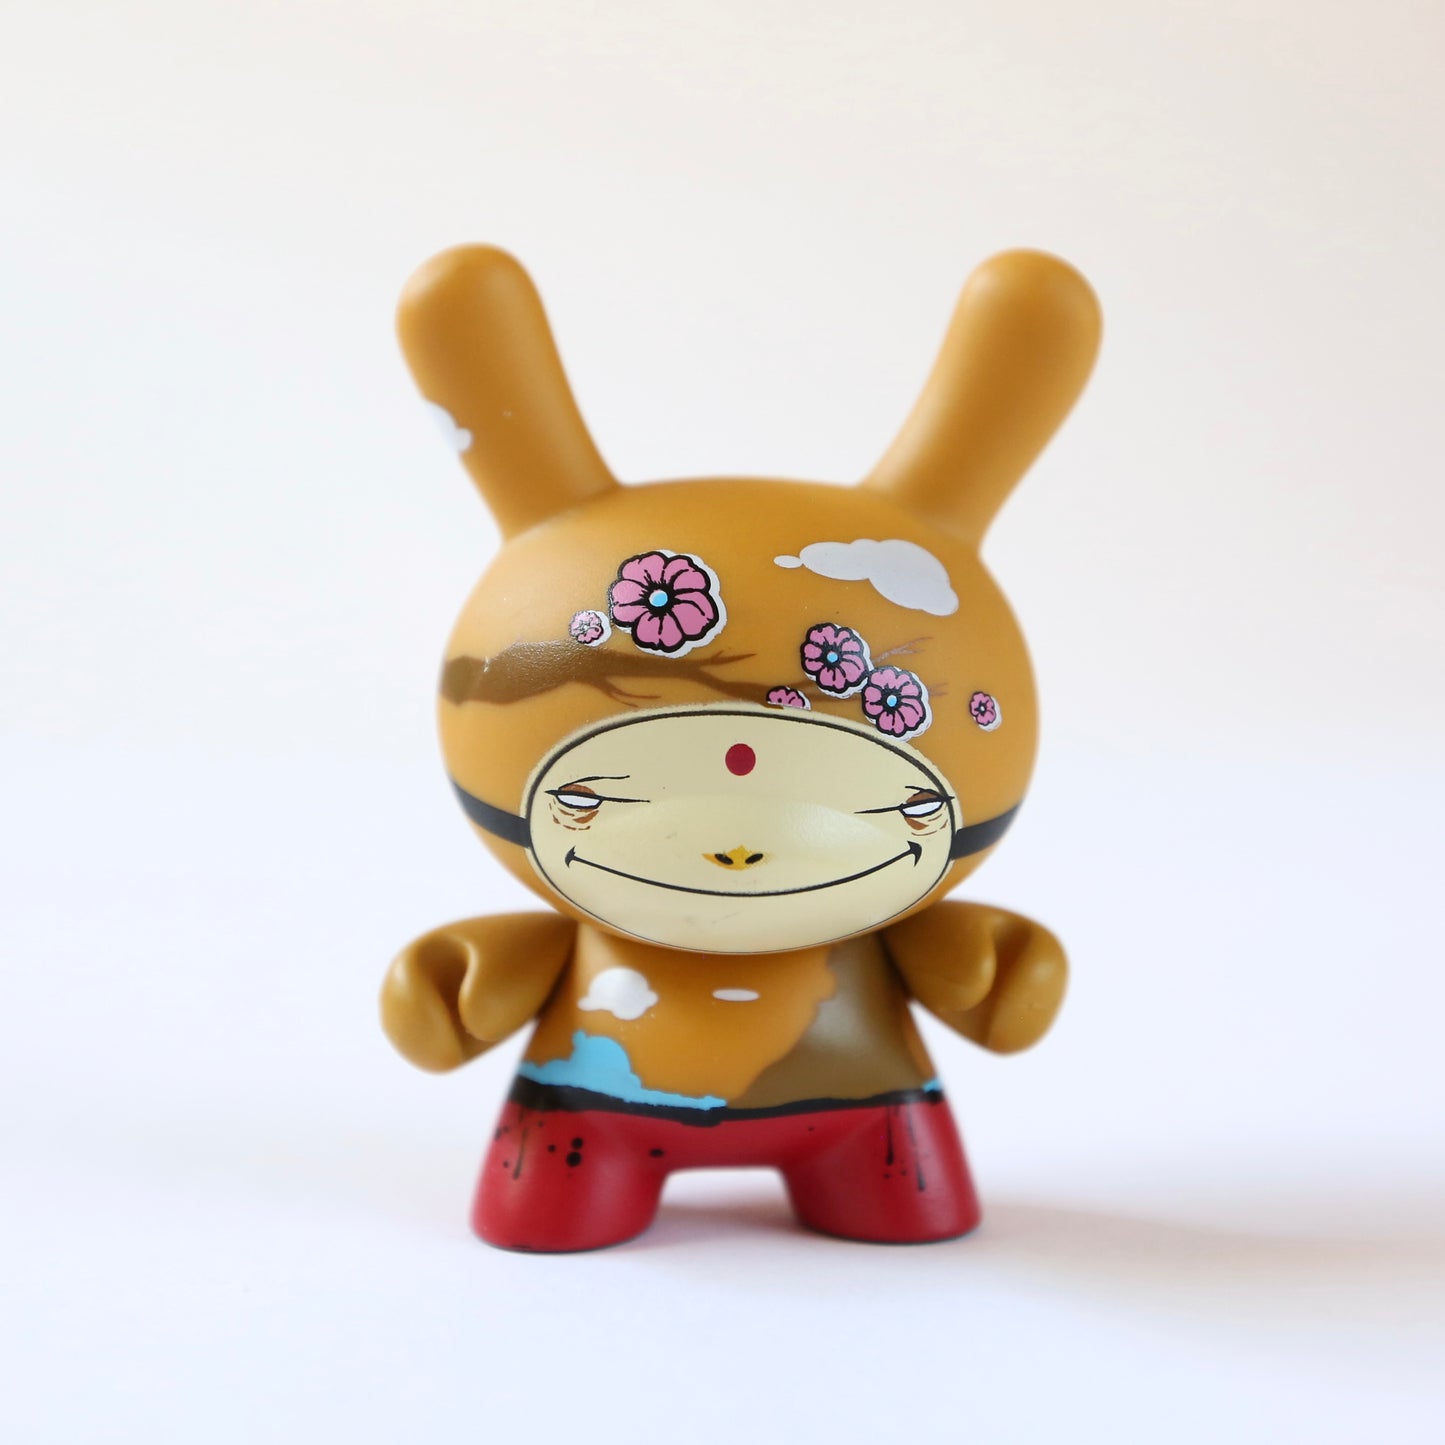 "Clouds" (2/25) 3in Dunny by Blaine Fontana x Kidrobot